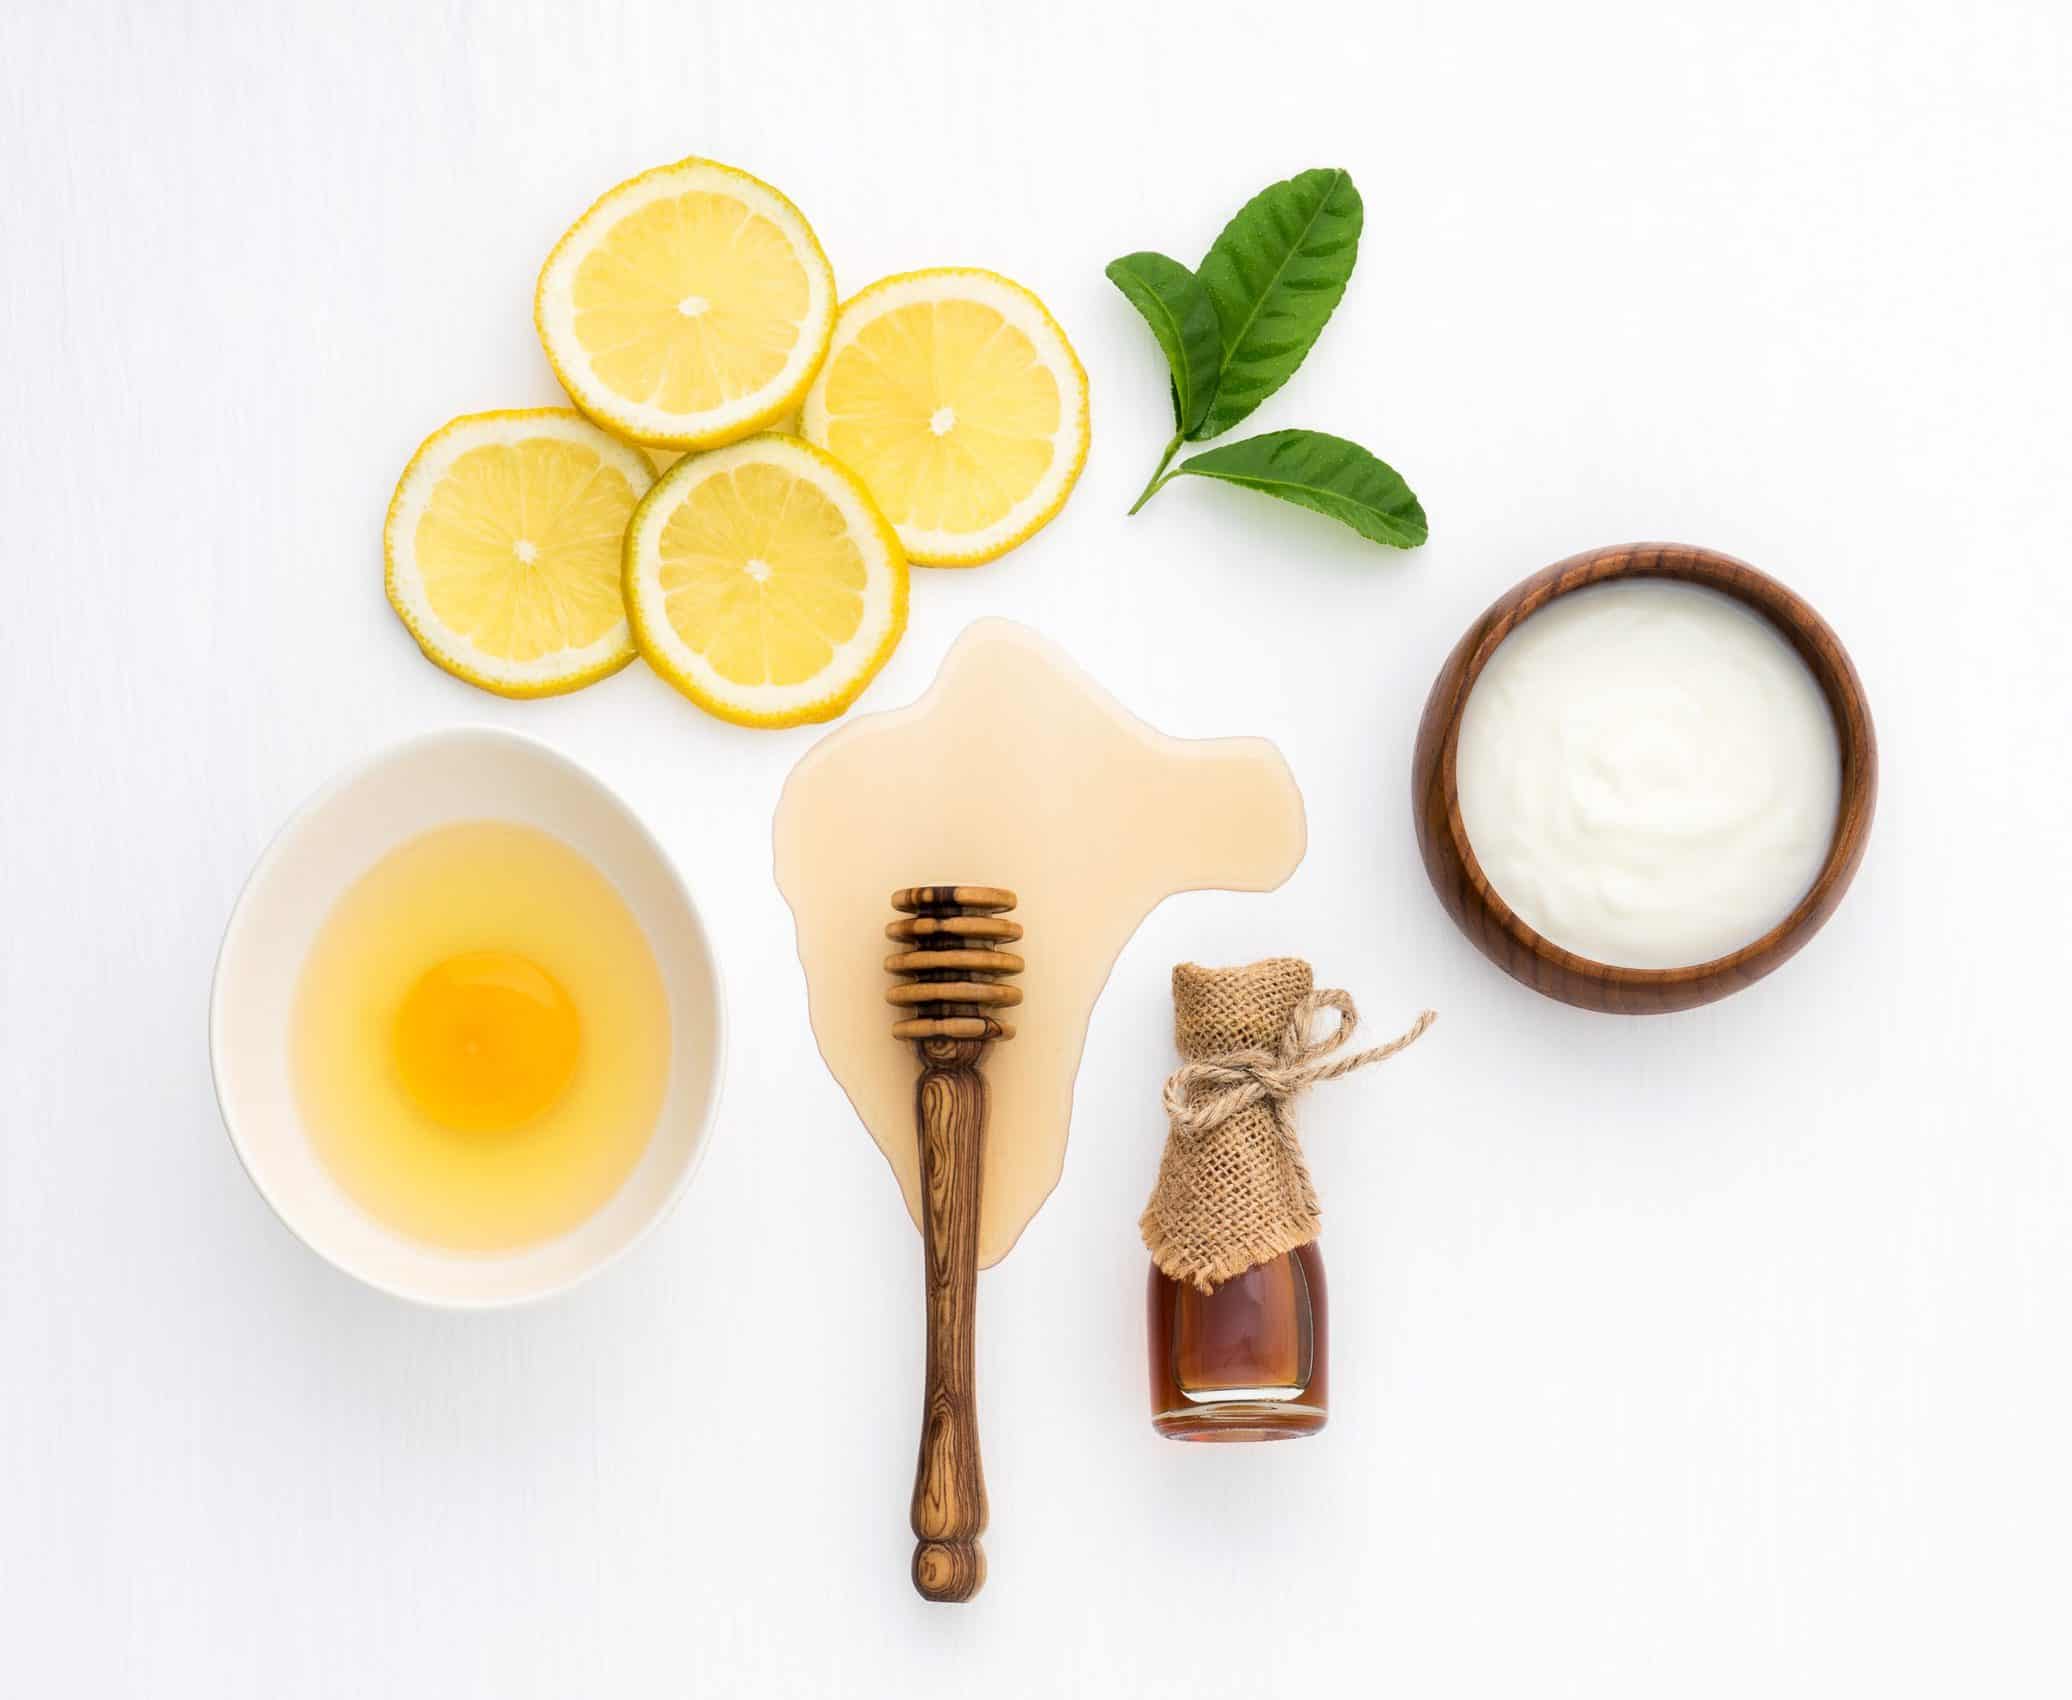 7 DIY Hair Treatments to Try While Self-Isolating — At-Home Haircare